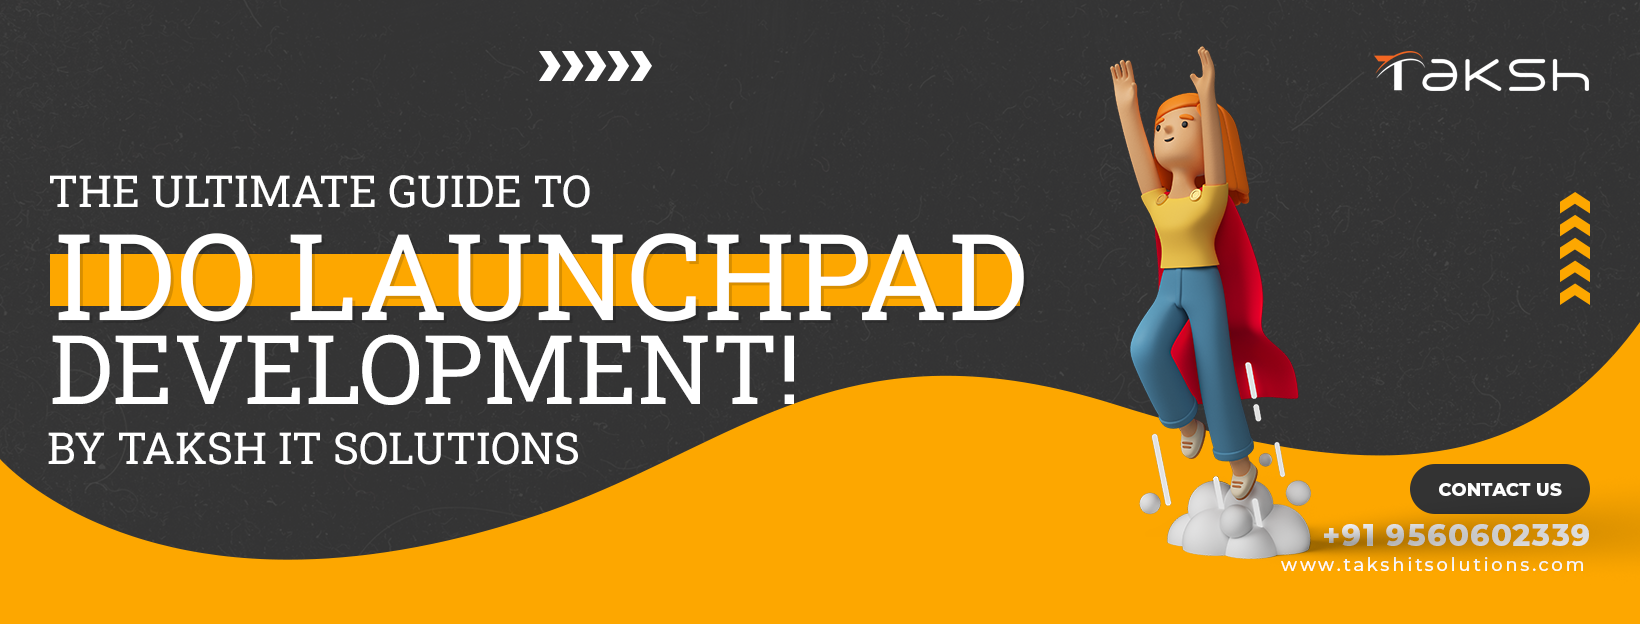 IDO Launchpad Development || Taksh IT Solutions Private Limited 